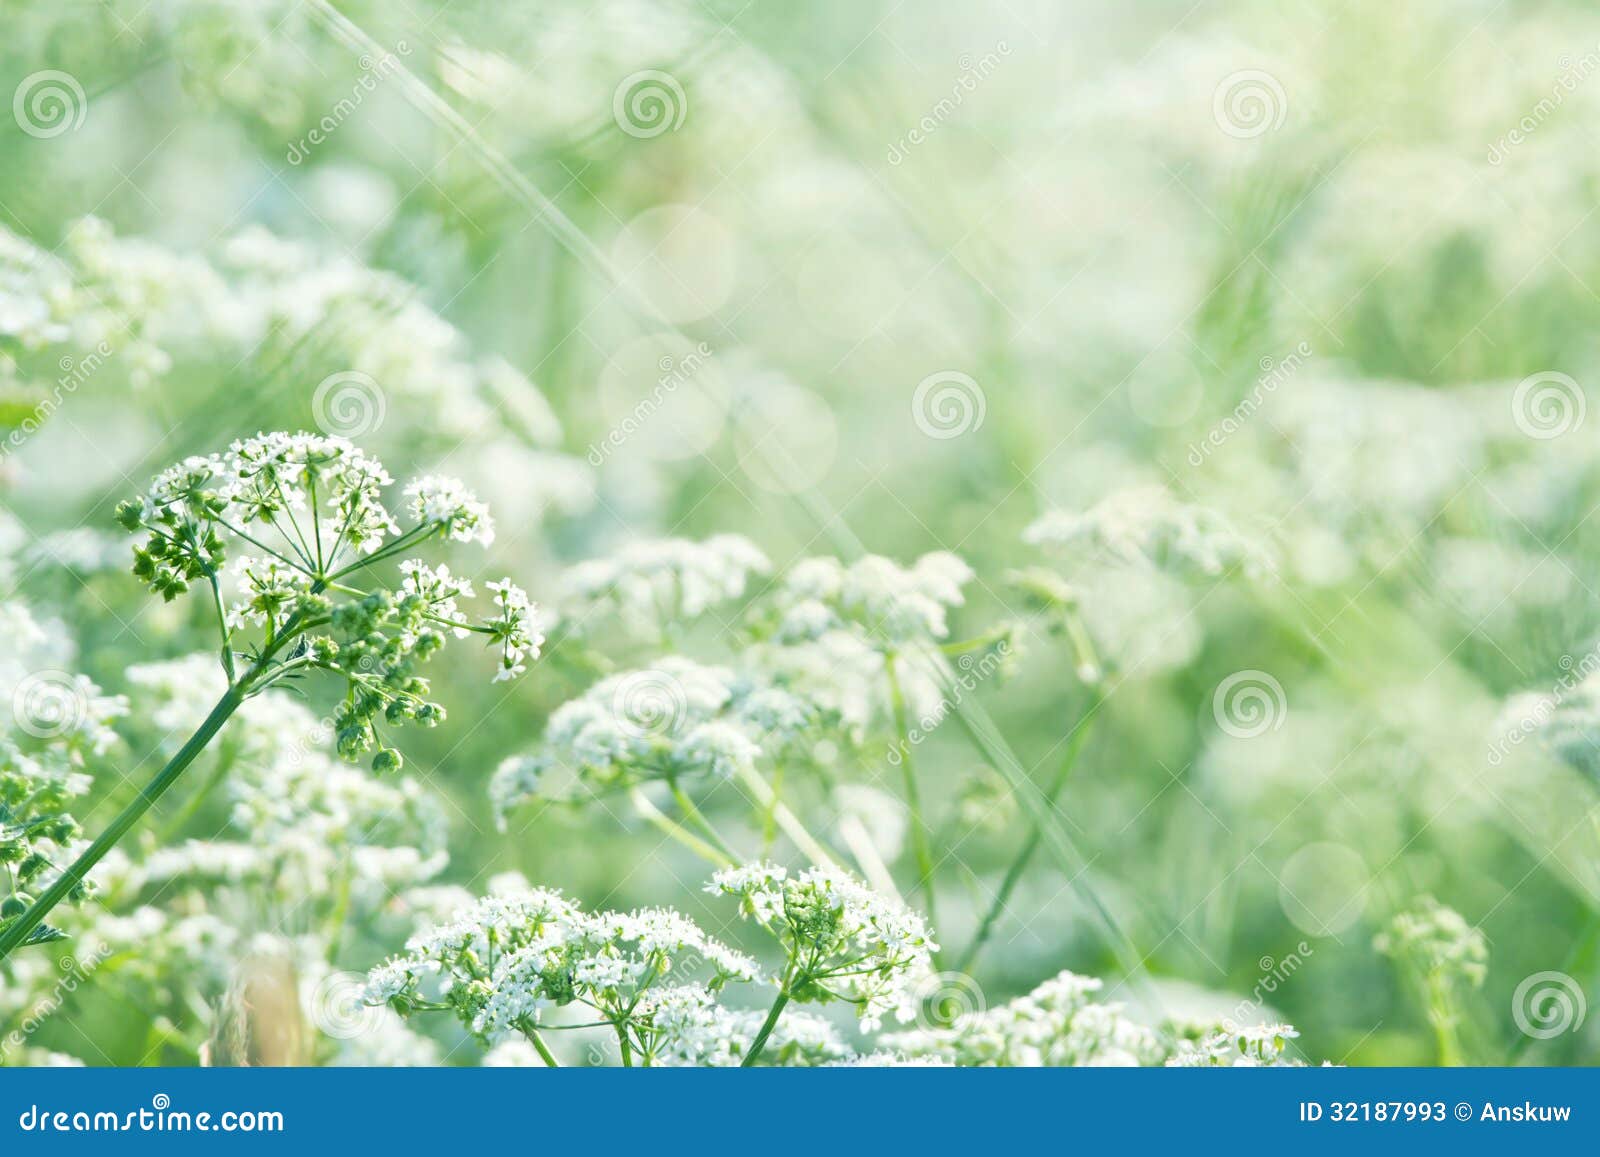 green summer meadow with queen annes lace